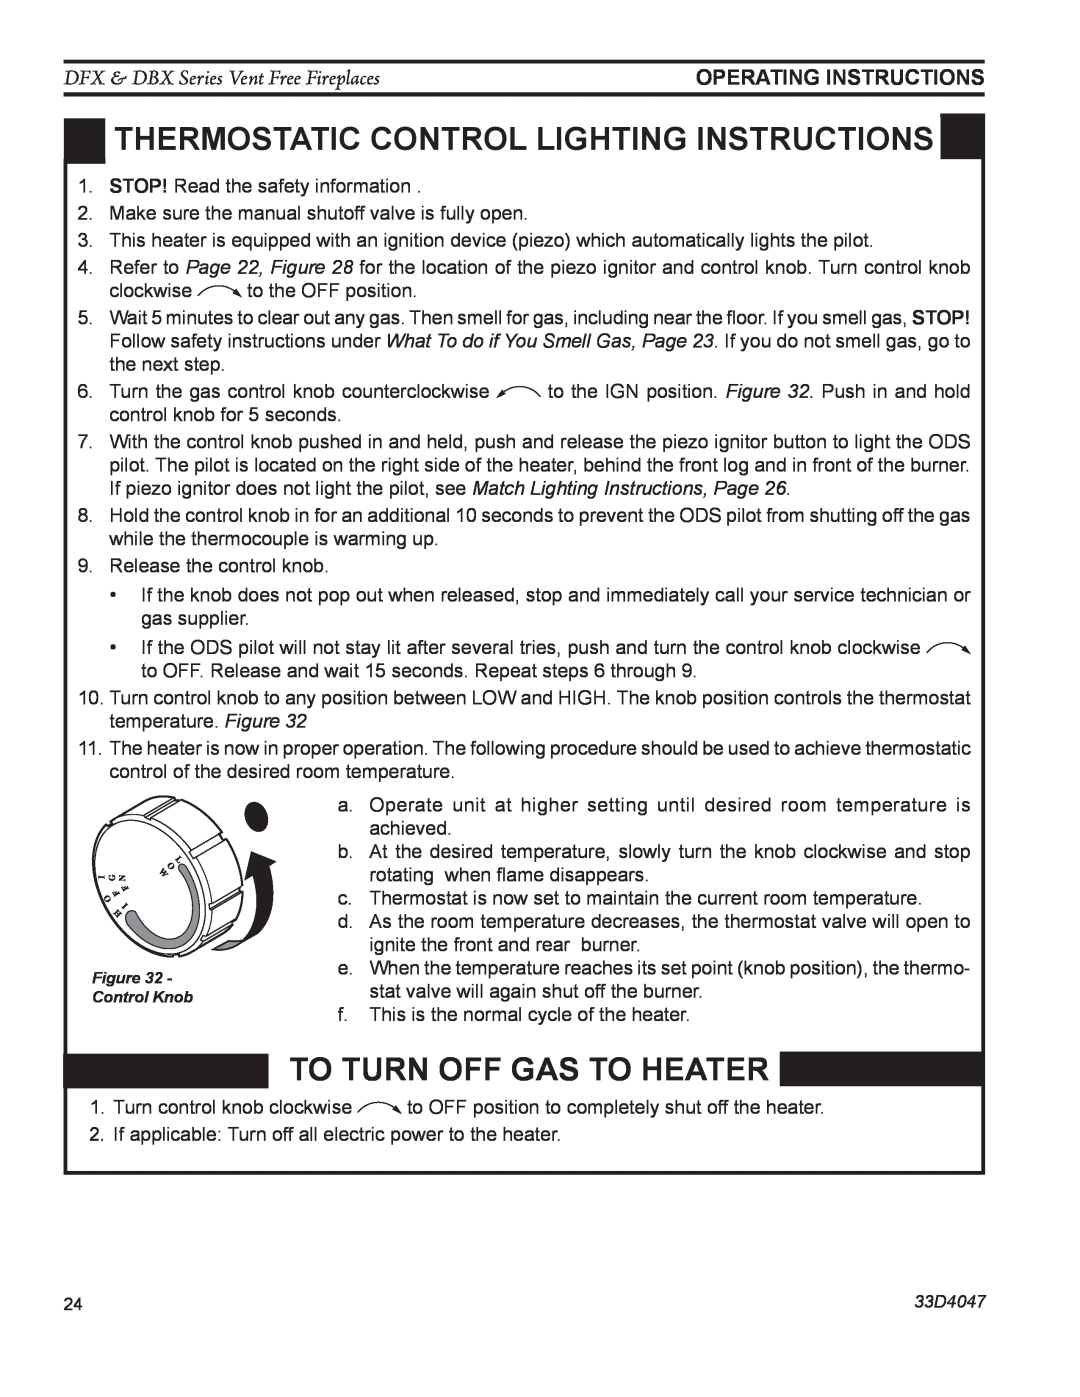 Monessen Hearth DFX24C thermostatIC control lighting instructions, To Turn Off Gas To Heater, Operating Instructions 